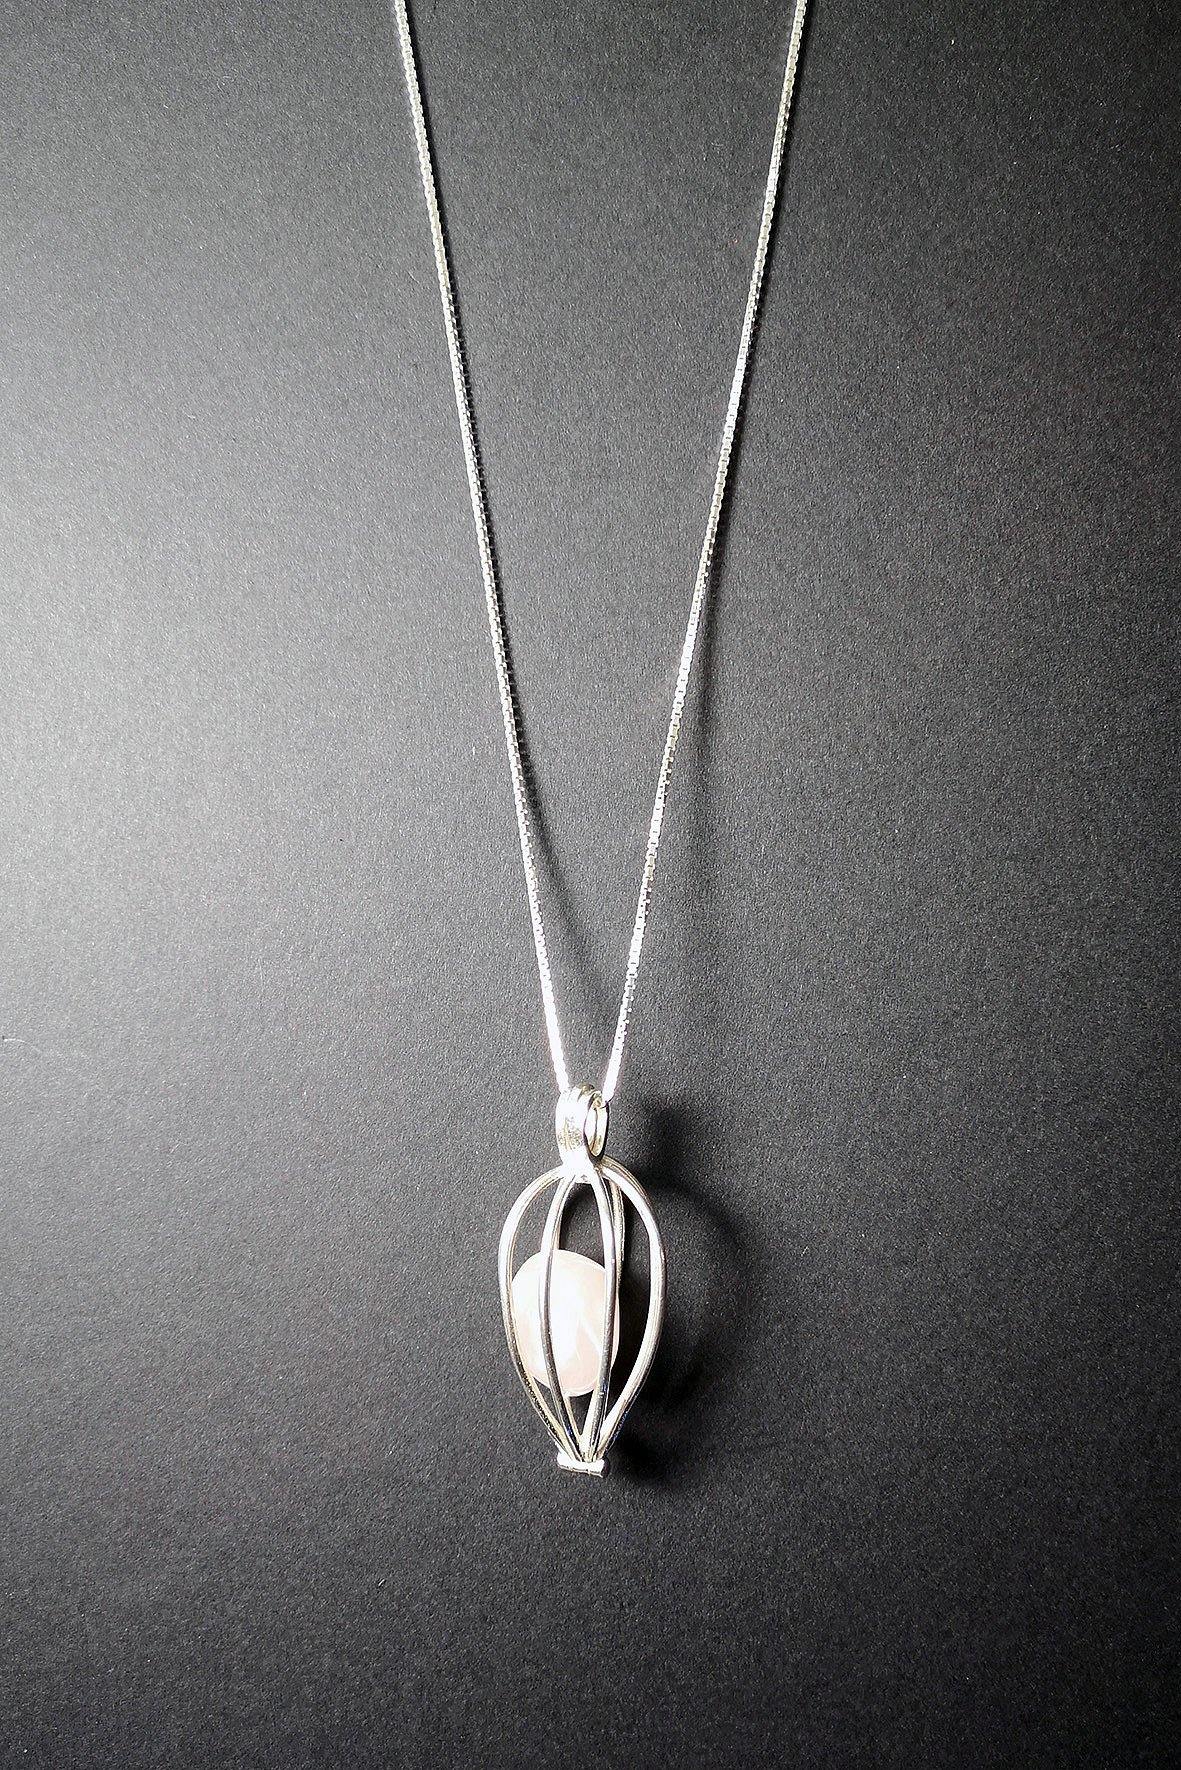 Silver Plated Crystal Cage Pendant Small